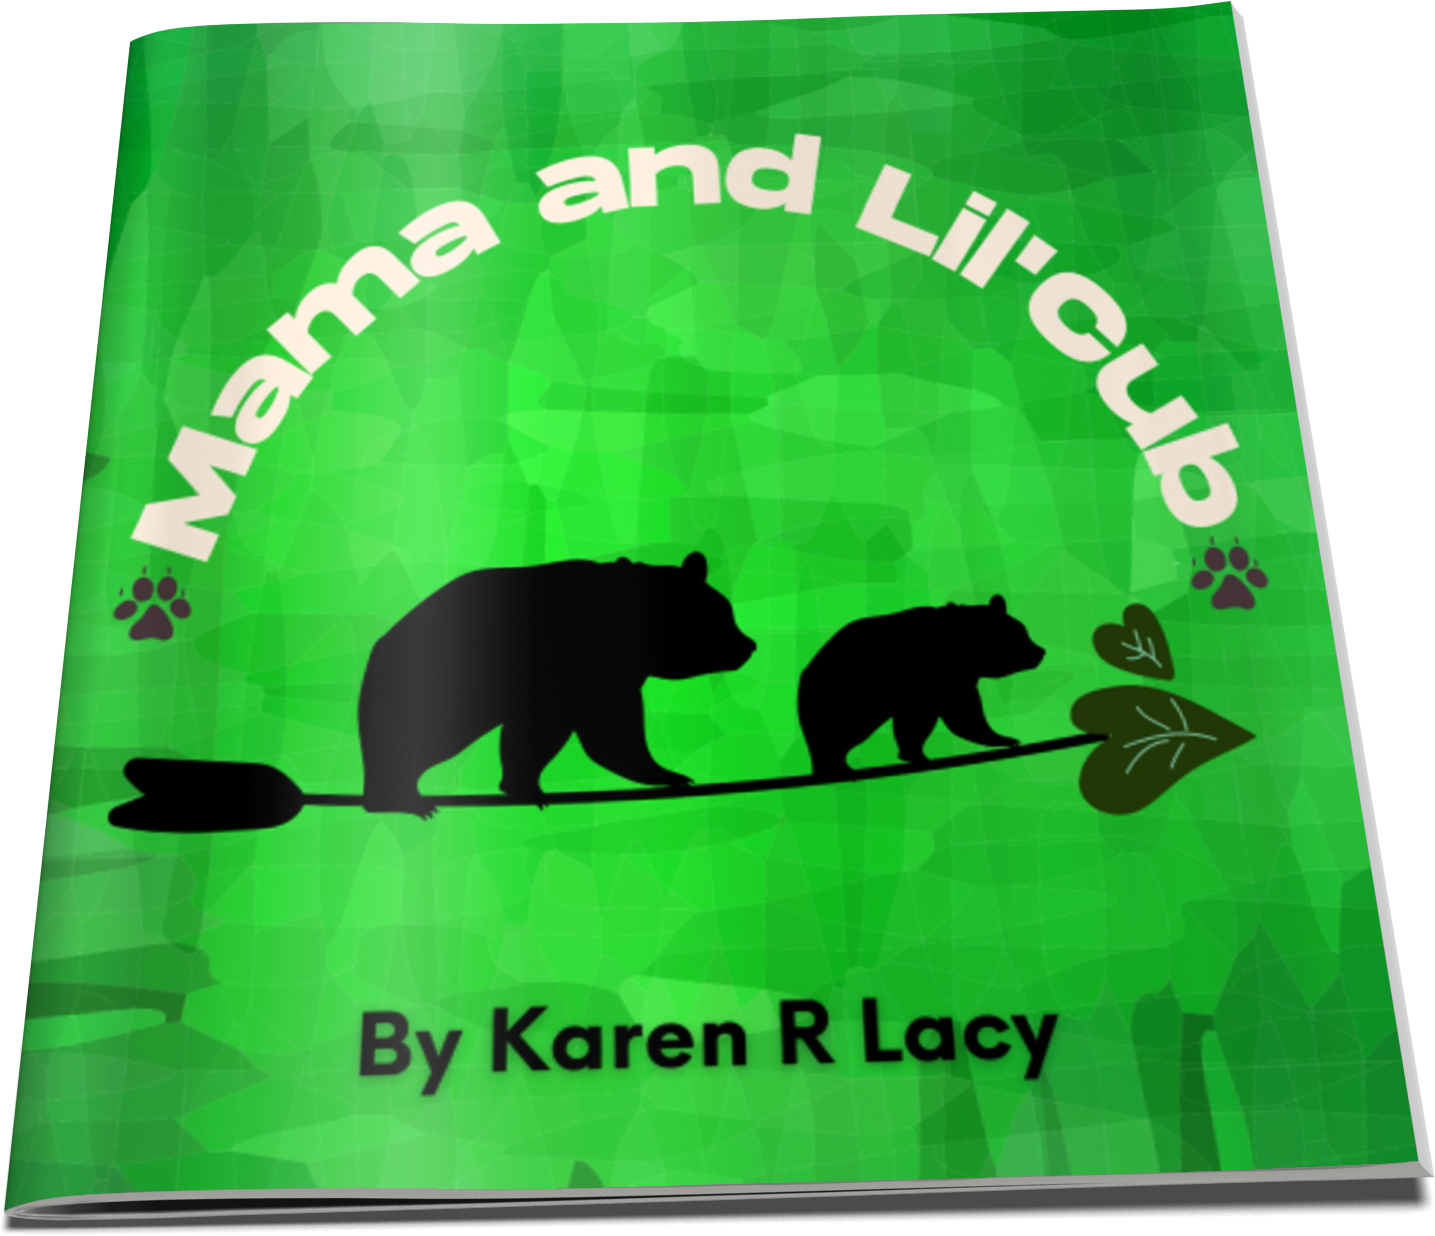 Mama and Lil' Cub by Karen R Lacy